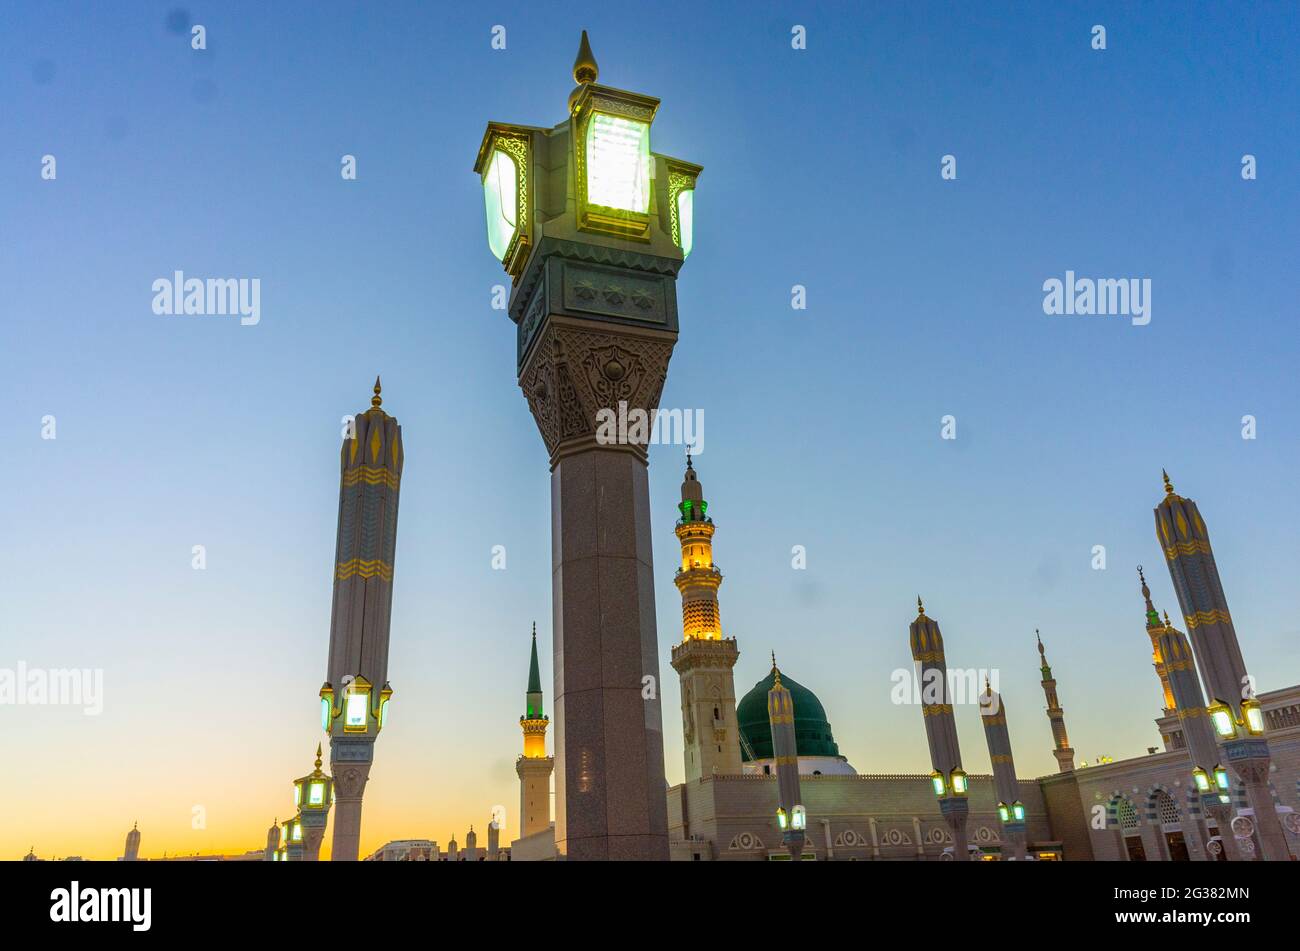 The Holy Prophet's Mosque (Masjid Nabawi) in Madinah, Saudi Arabia This is the second-holiest mosque in Islam. Stock Photo